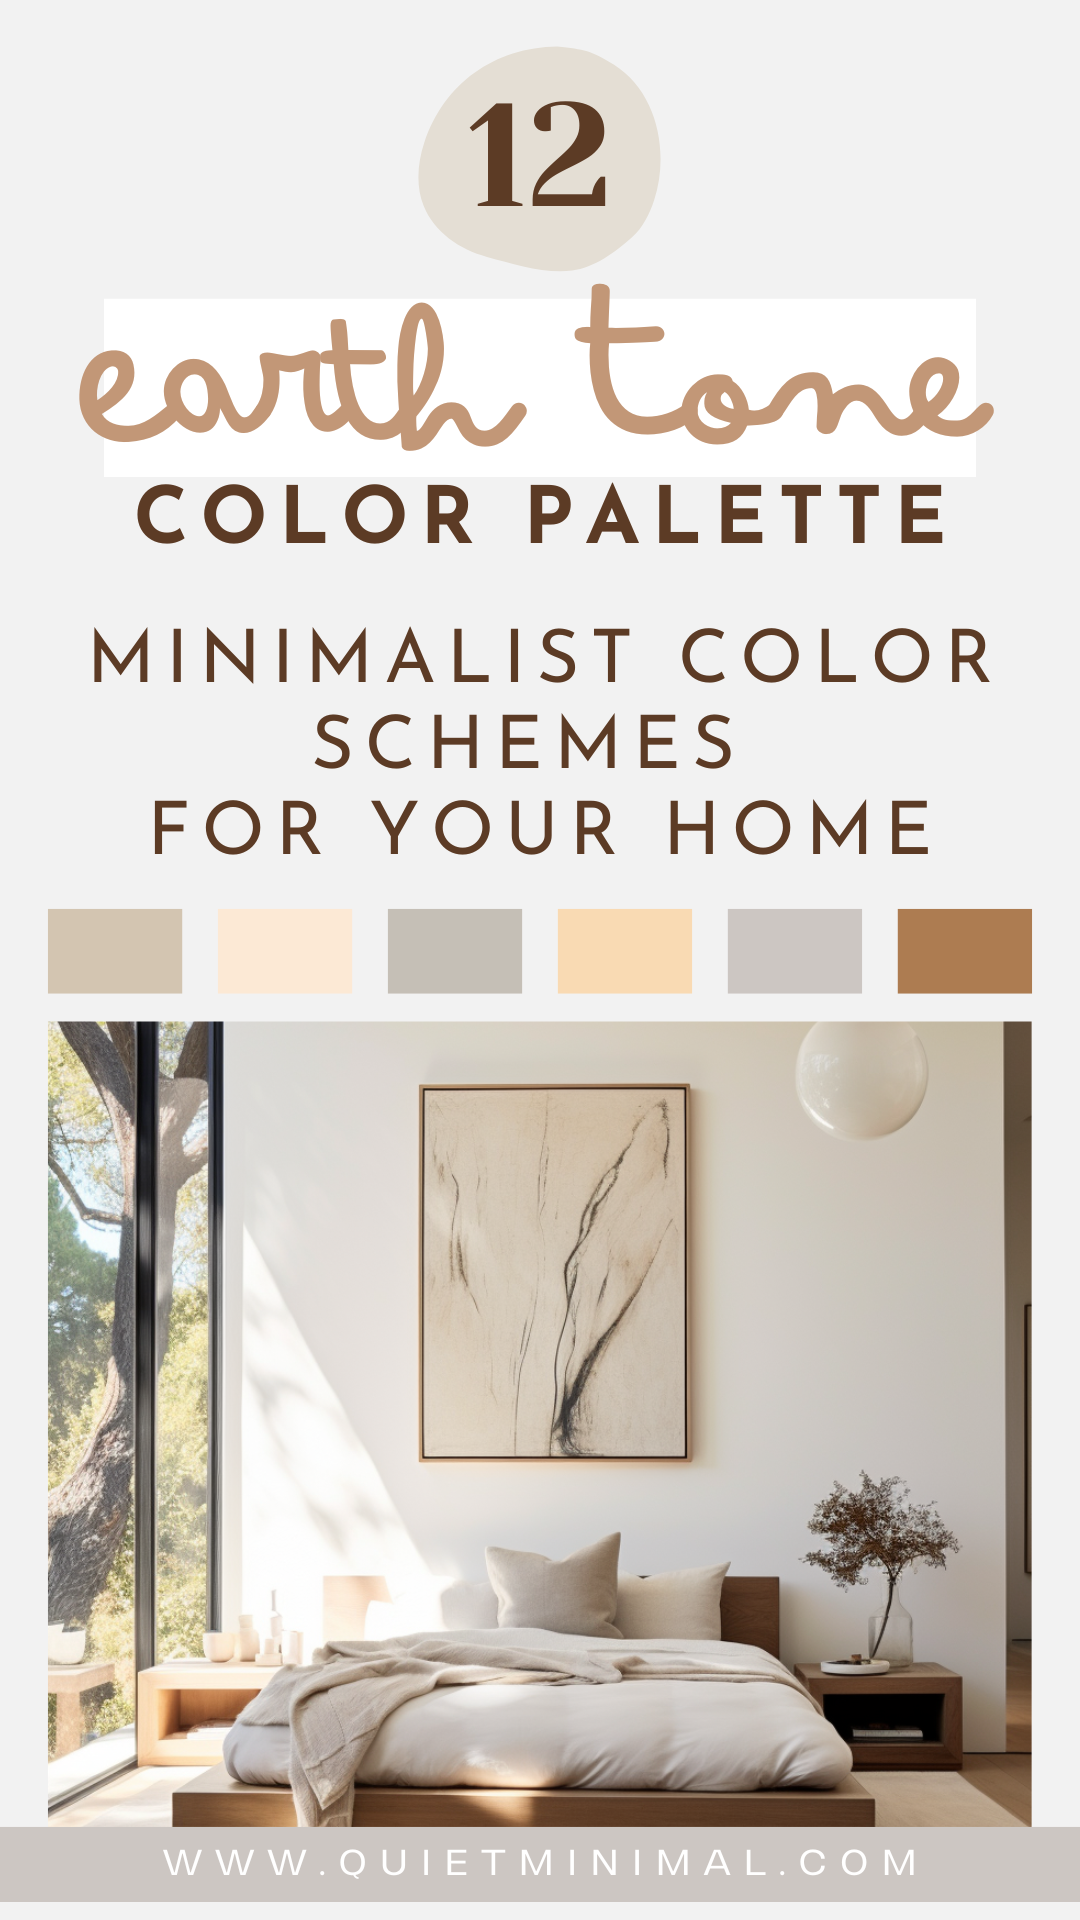 Earth tone aesthetic color palette minimalist color schemes for your home.